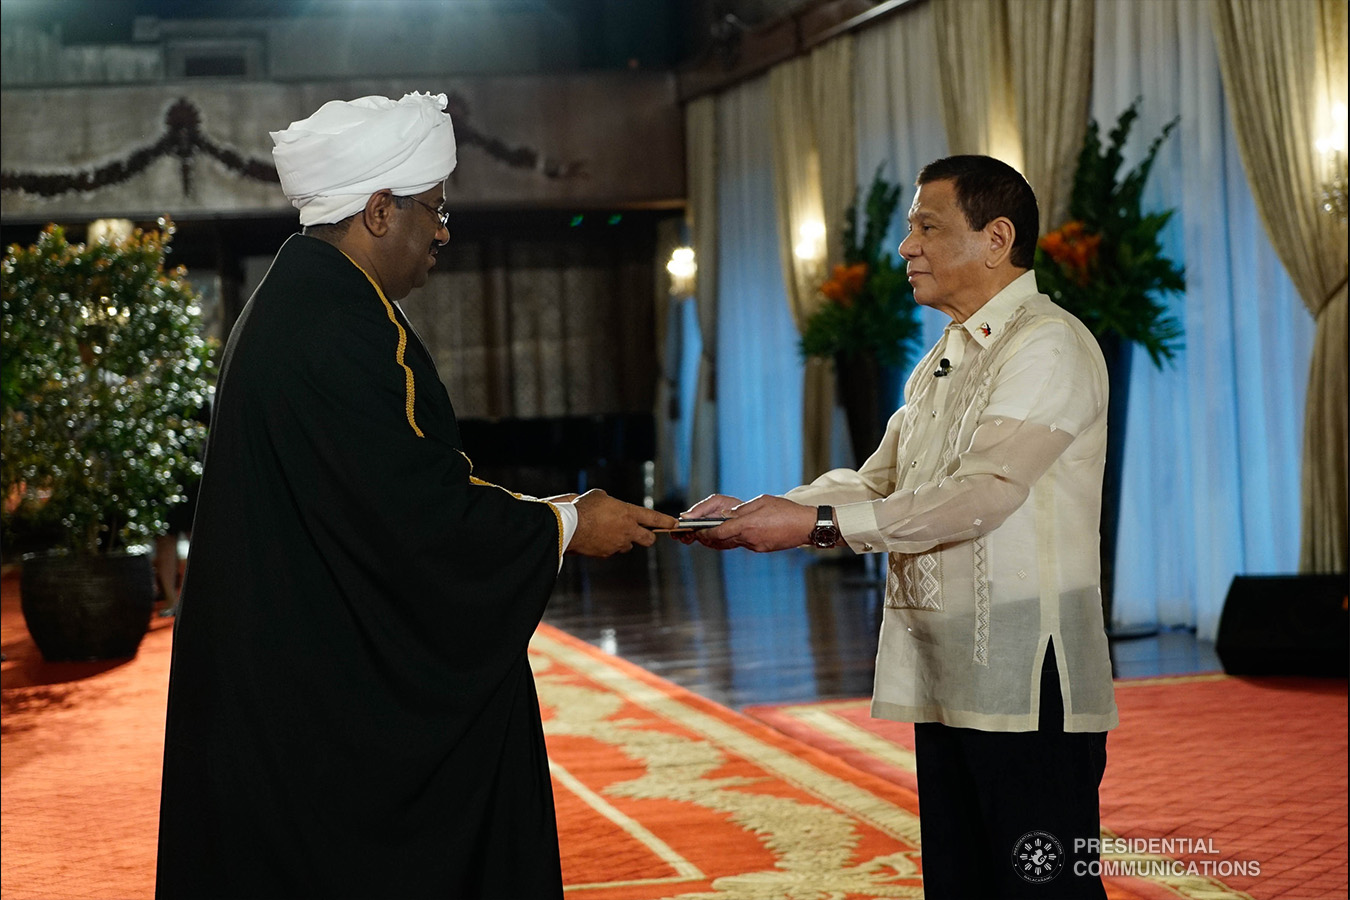 President Rodrigo Roa Duterte receives the credentials of Non-resident Ambassador Designate of Sudan Hamza Omer Hassan Ahmed during a ceremony at the Malacañan Palace on January 21, 2019. KING RODRIGUEZ/PRESIDENTIAL PHOTO